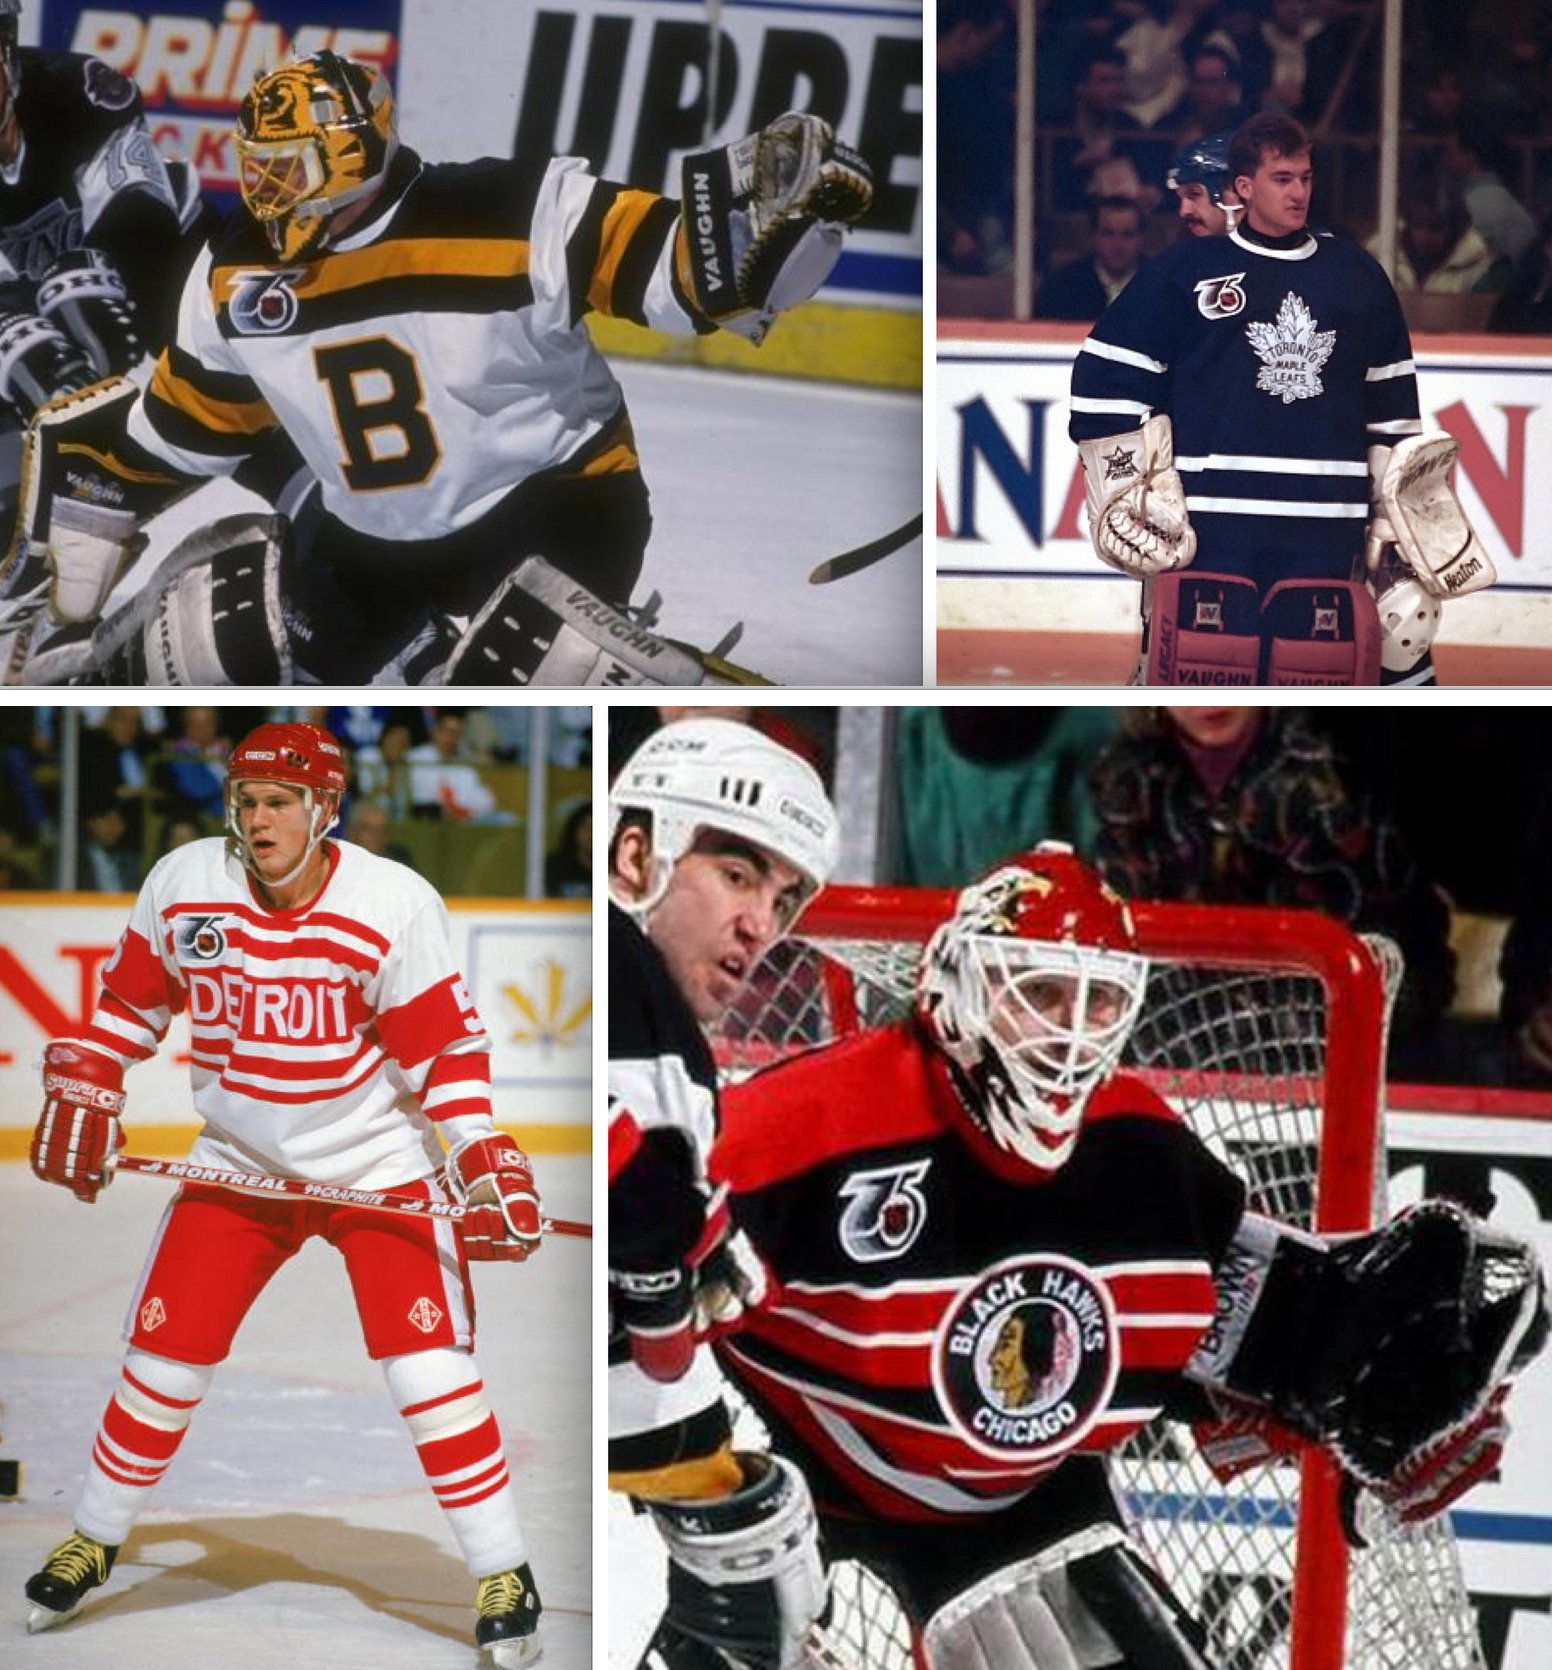 Paul Lukas on X: First NHL throwbacks were worn in 1991-92 by the